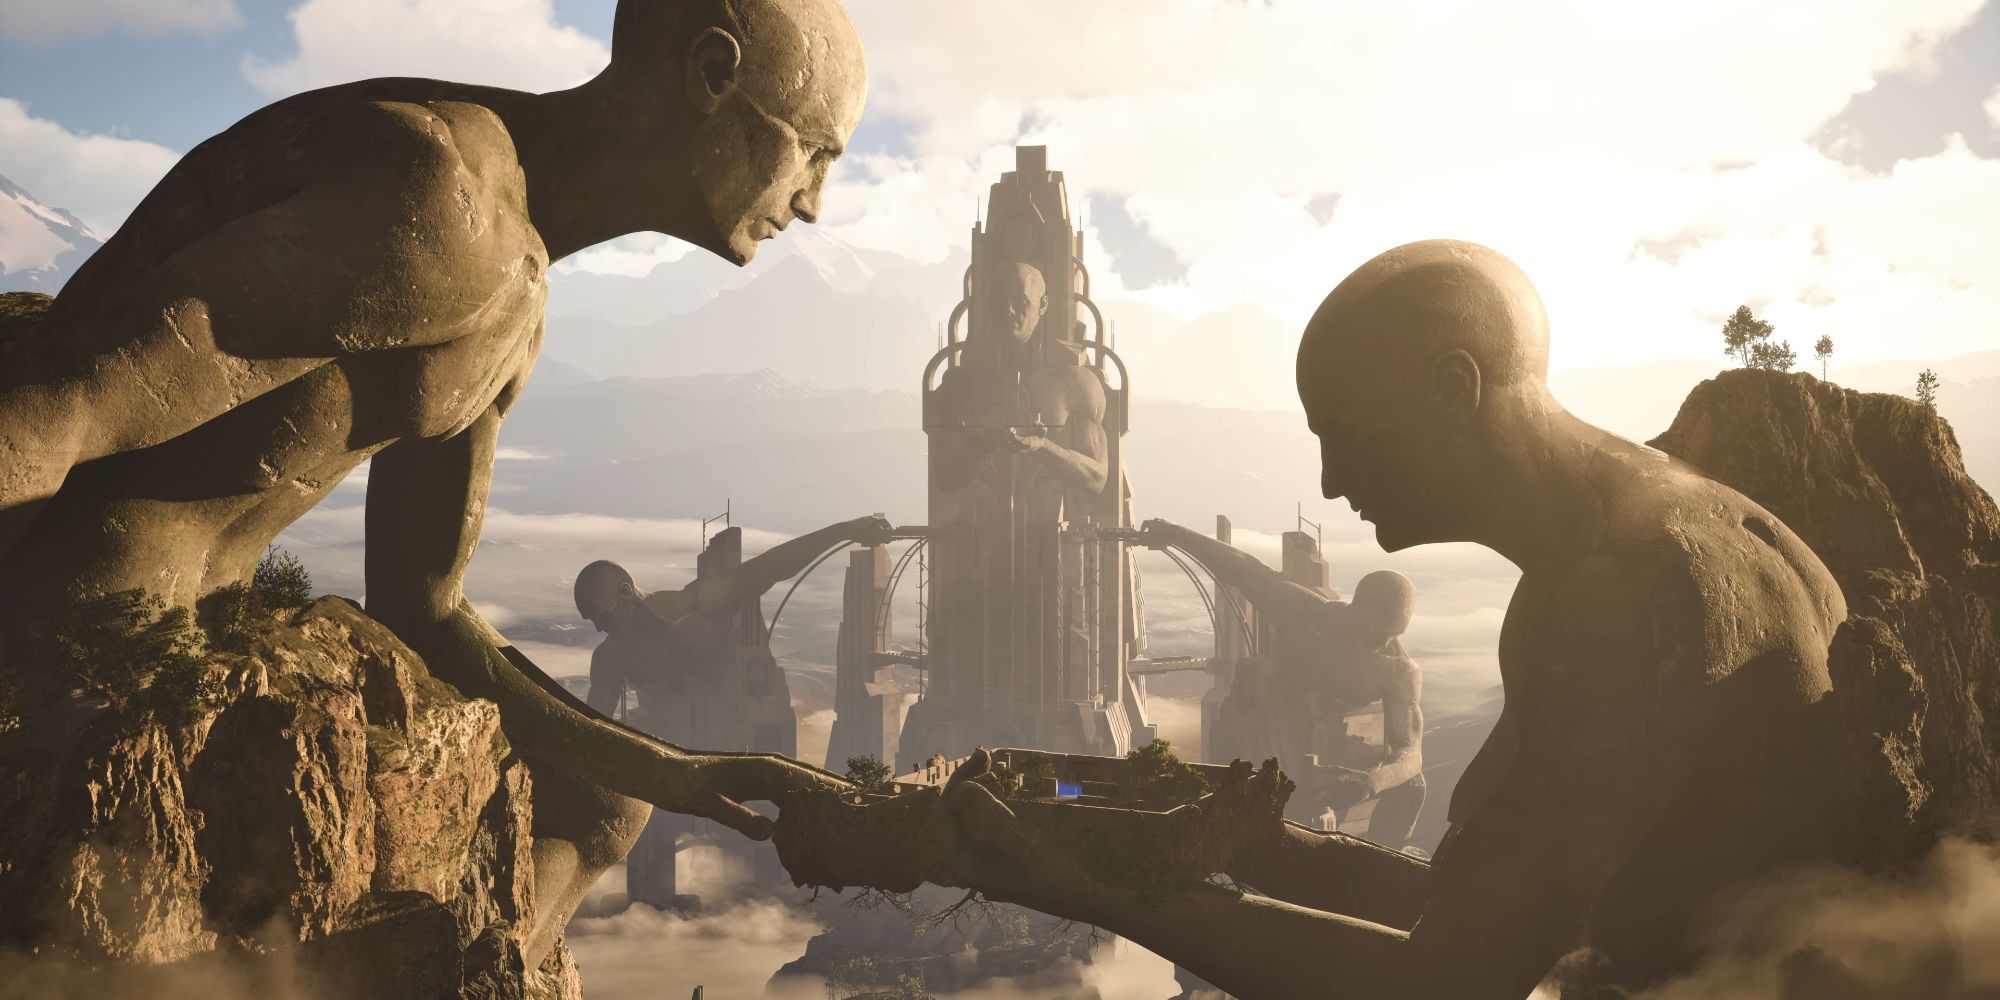 Two large, humanoid statues reach out to each other in The Talos Principle 2's trailer, with a tower and more statues in the background.